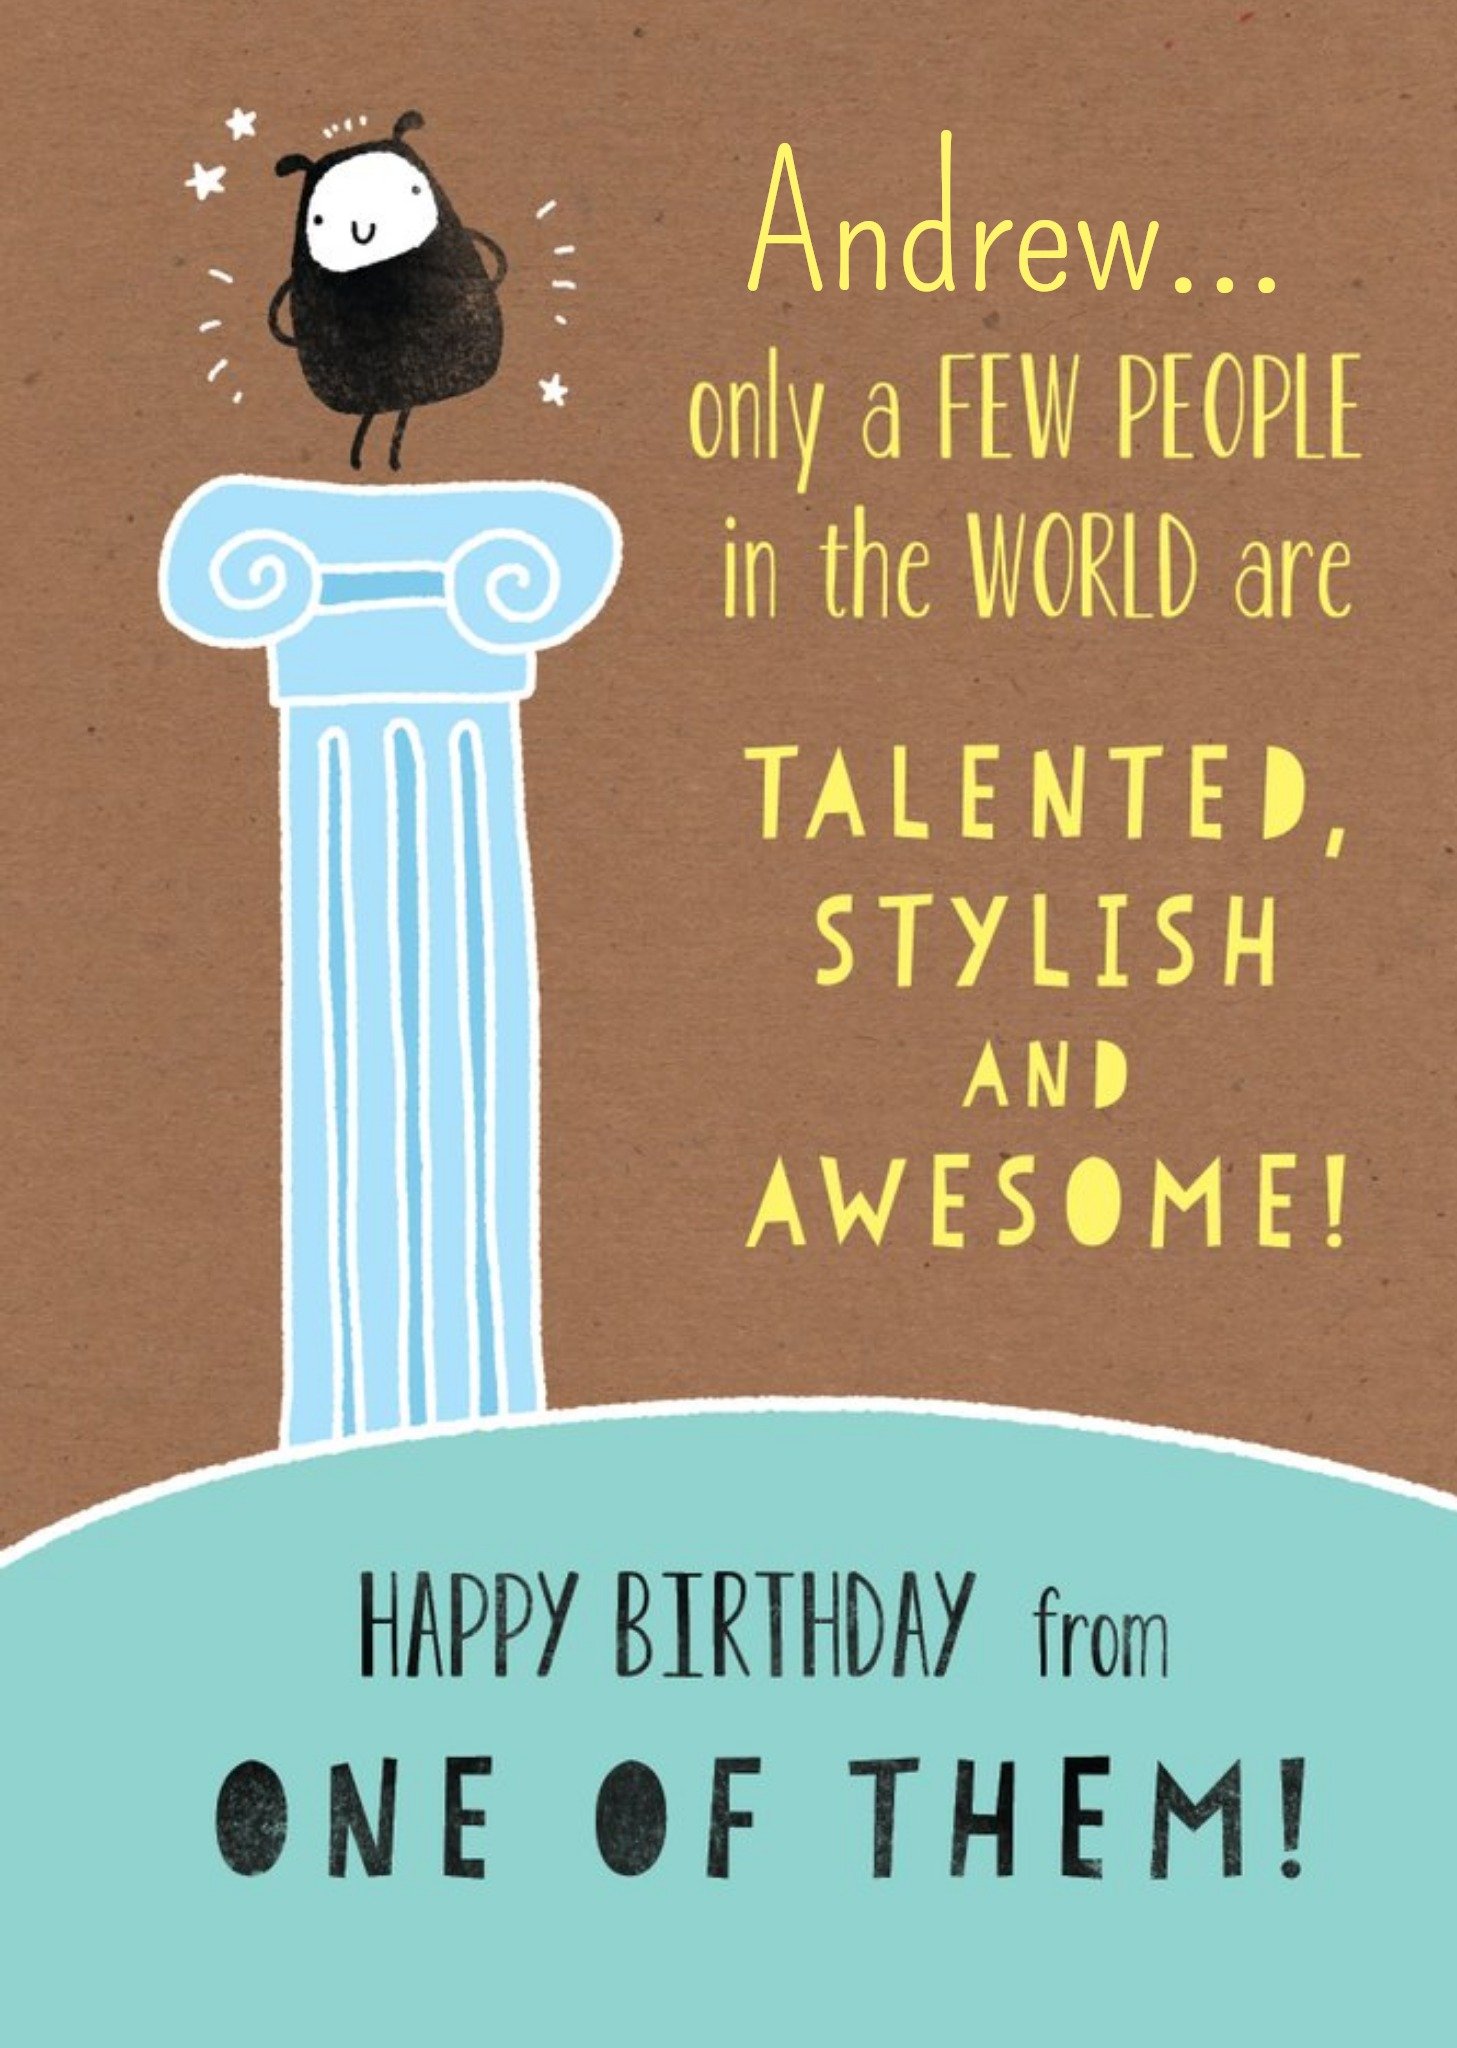 Moonpig Talented Stylish And Awesome Personalised Happy Birthday Card, Large